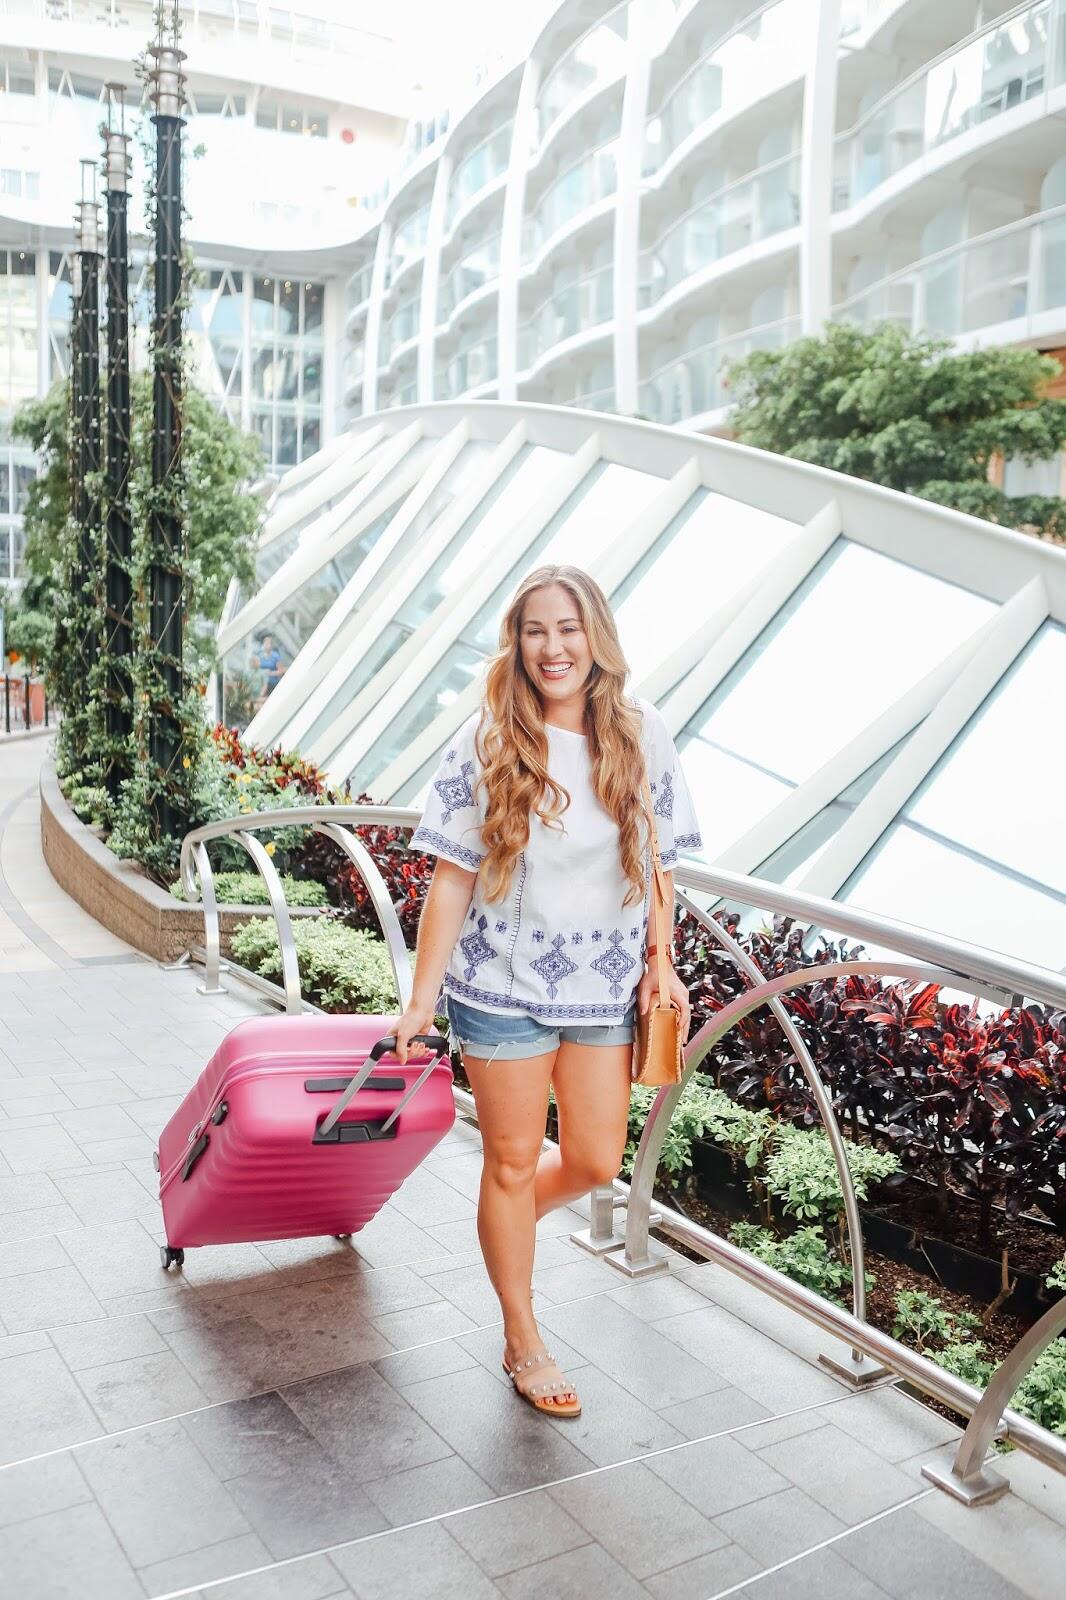  The Ultimate Packing Checklist for an International Trip by popular blogger Walking in Memphis in High Heels